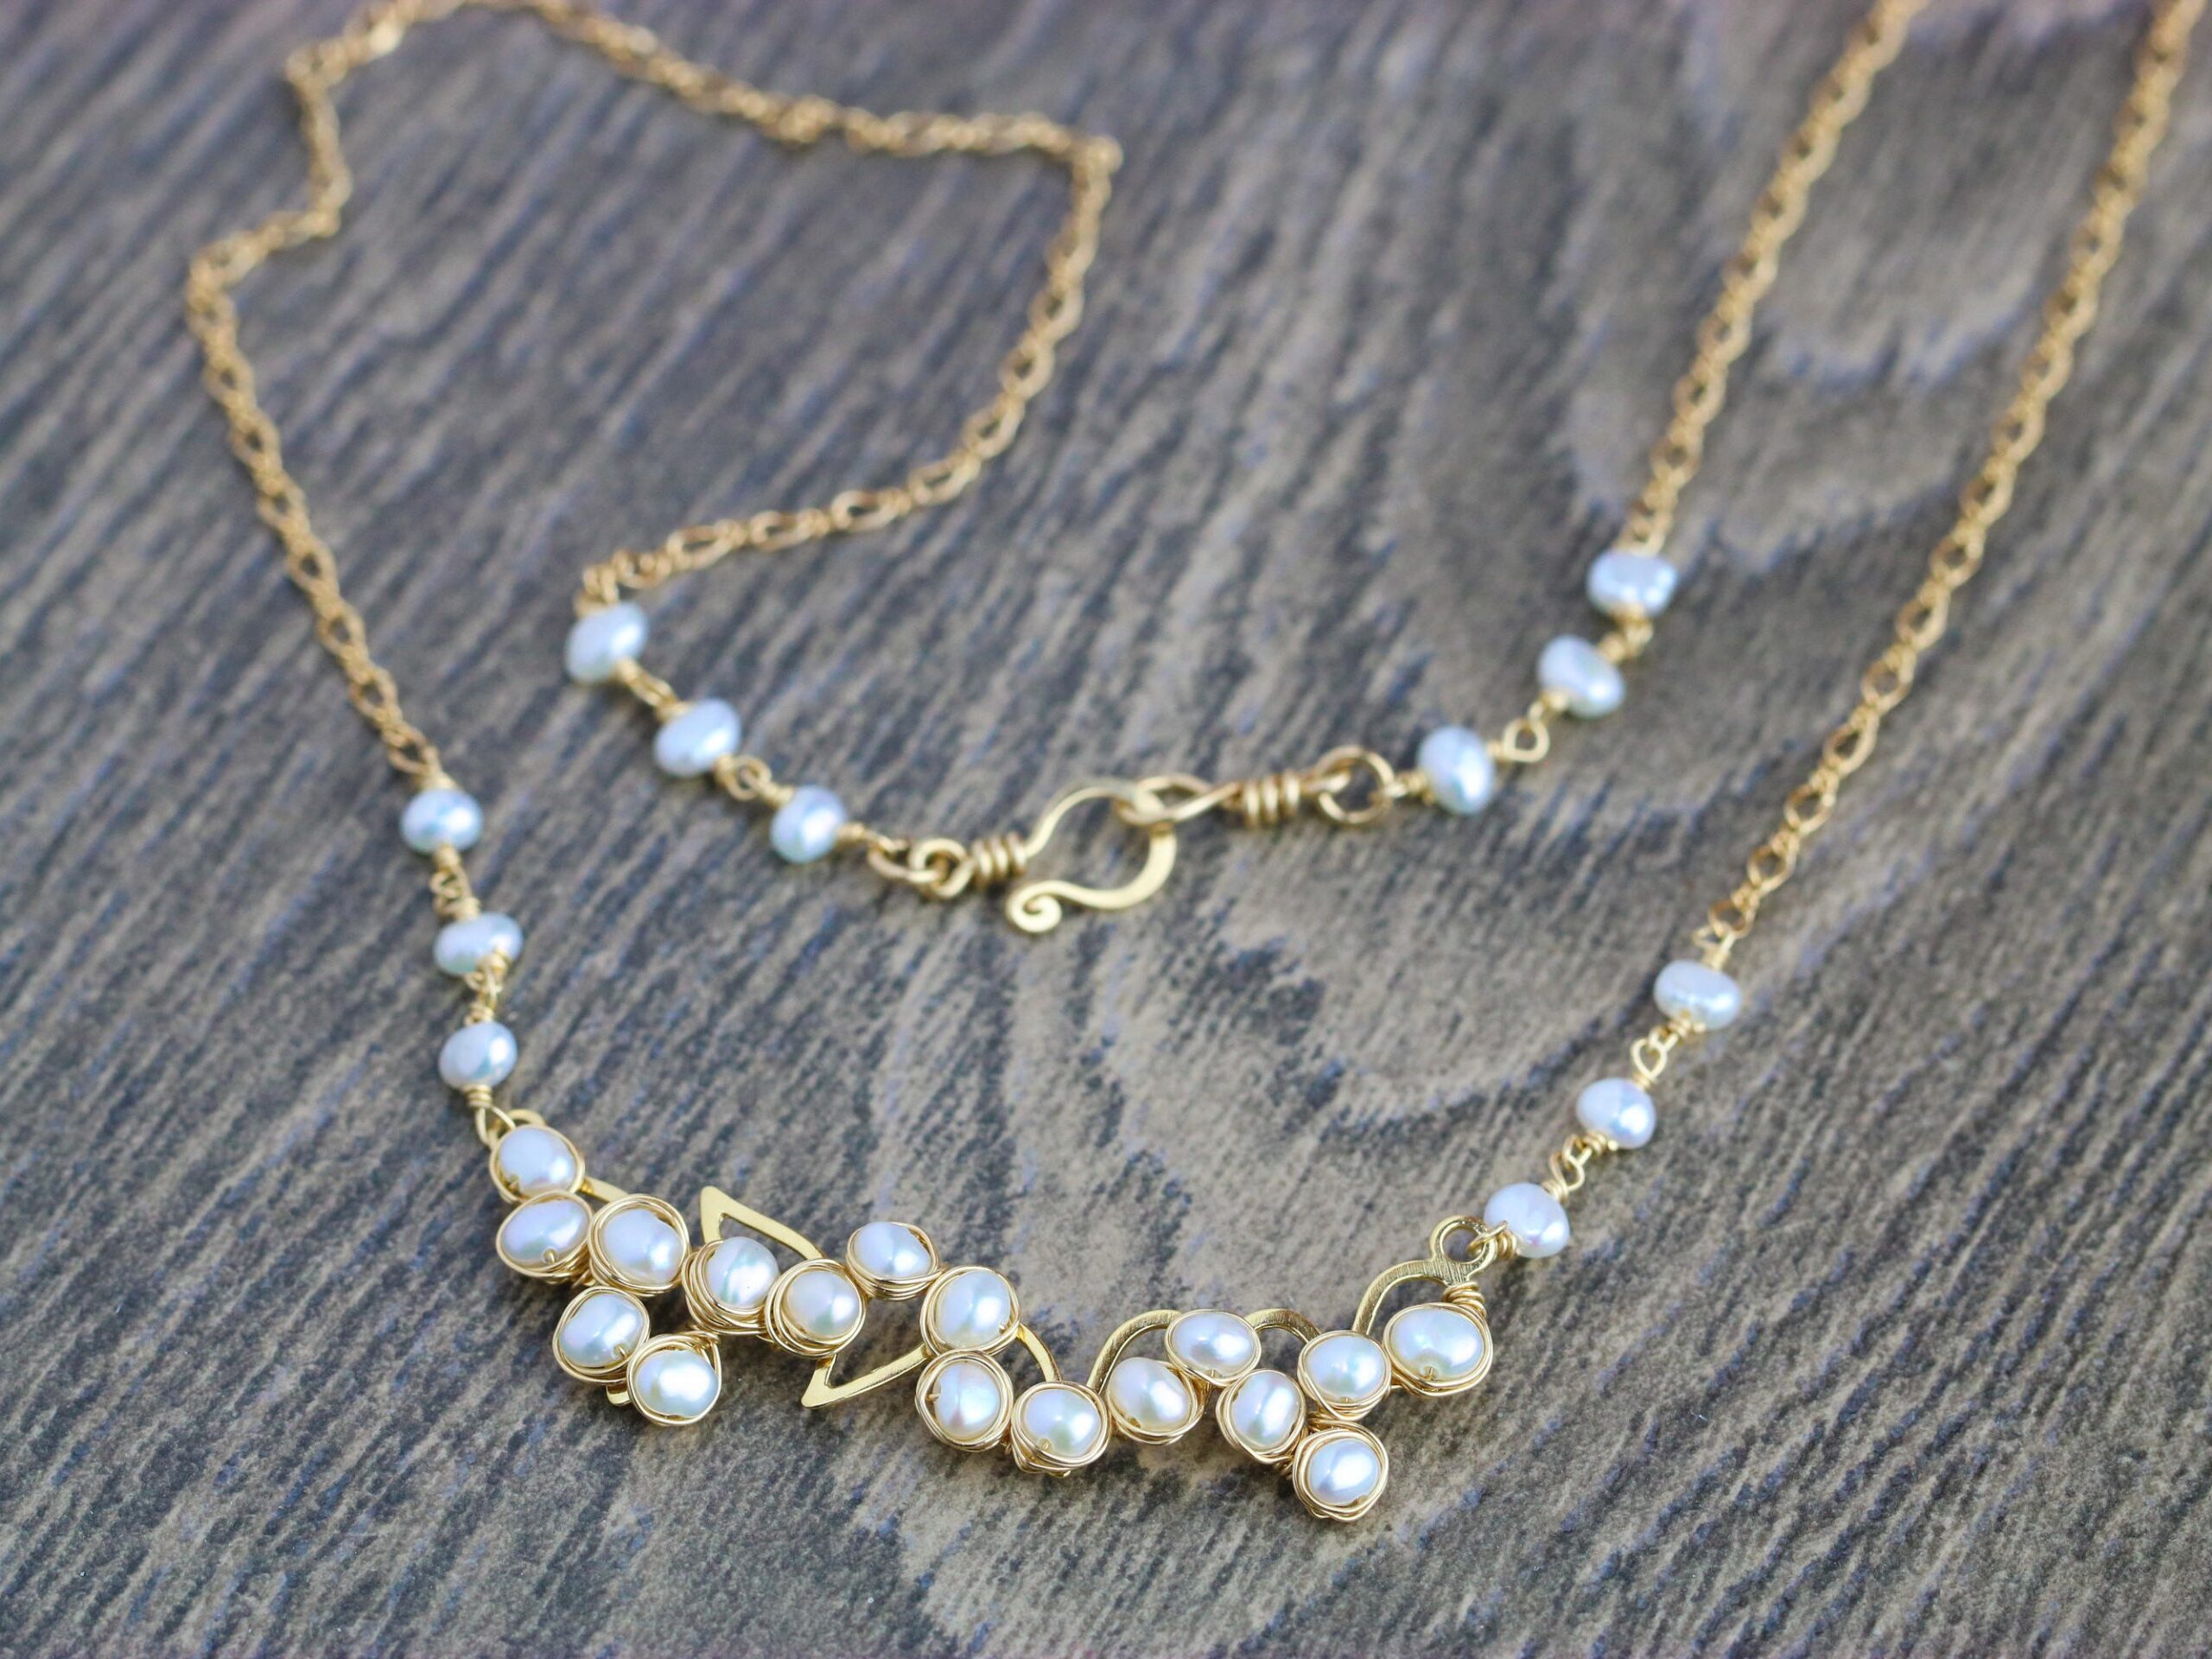 Pearl Bar Necklace Wire Wrapped in Gold Filled